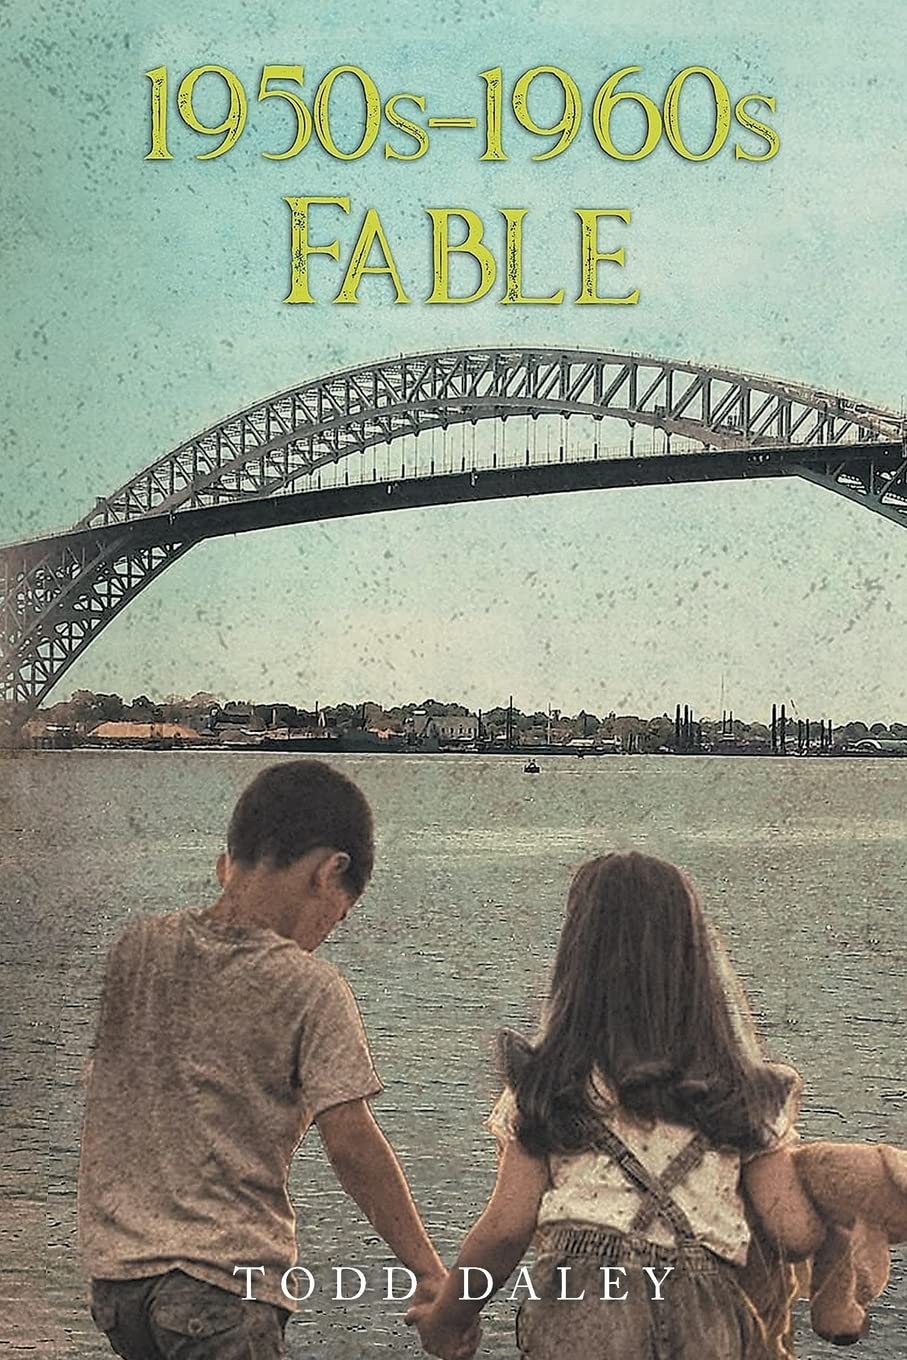 1950s-1960s Fable by Author Todd Daley